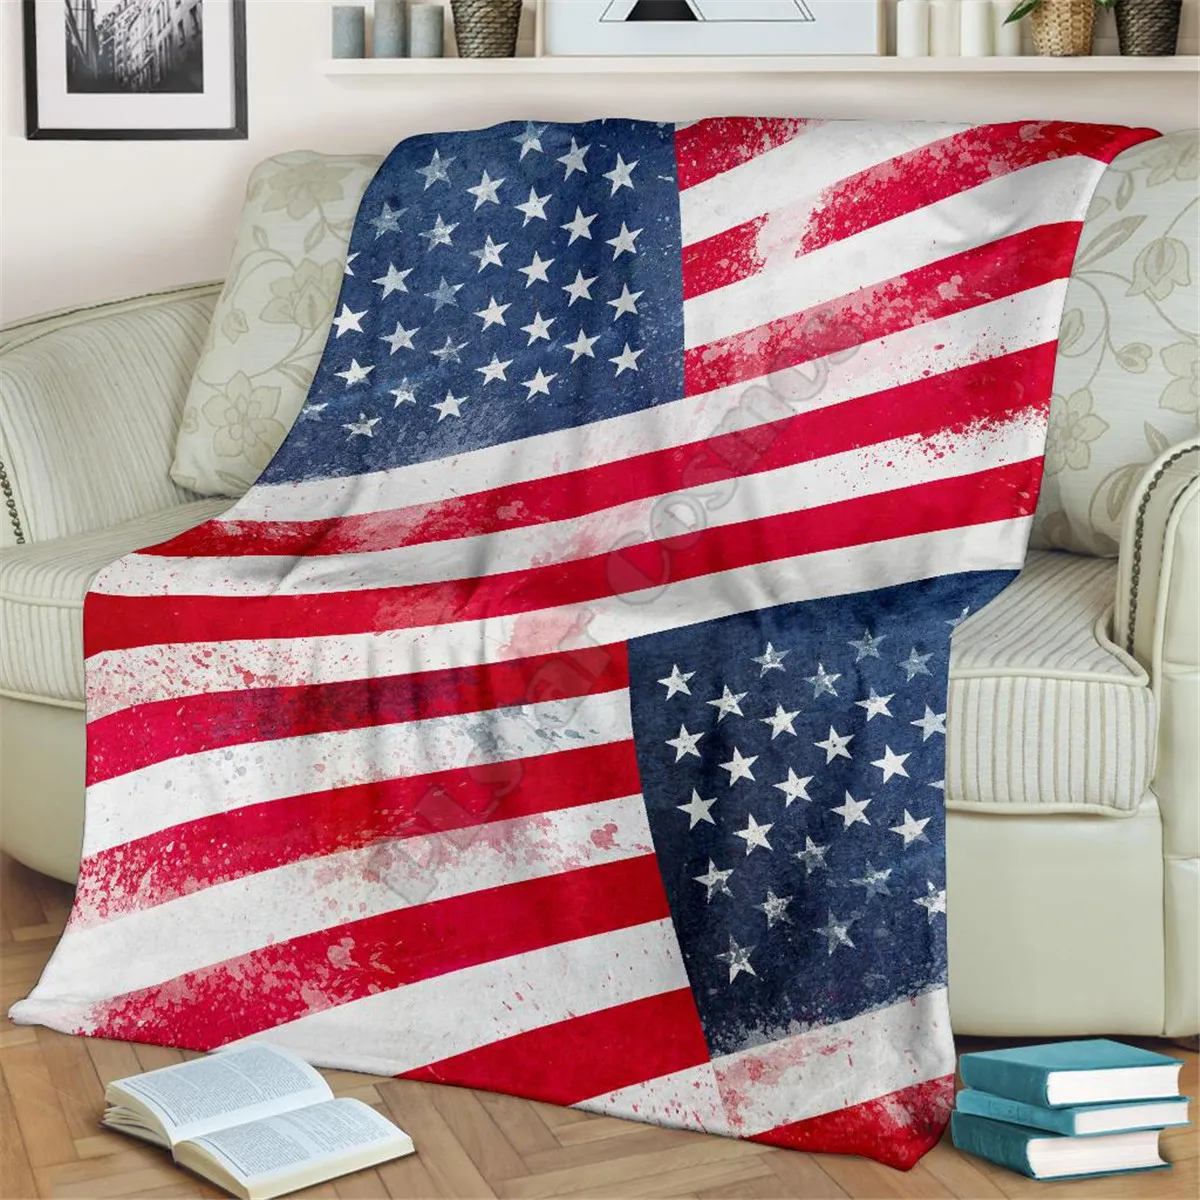 

American Flag 3d printed fleece blanket Beds Hiking Picnic Thick Quilt Fashionable Bedspread Sherpa Throw Blanket